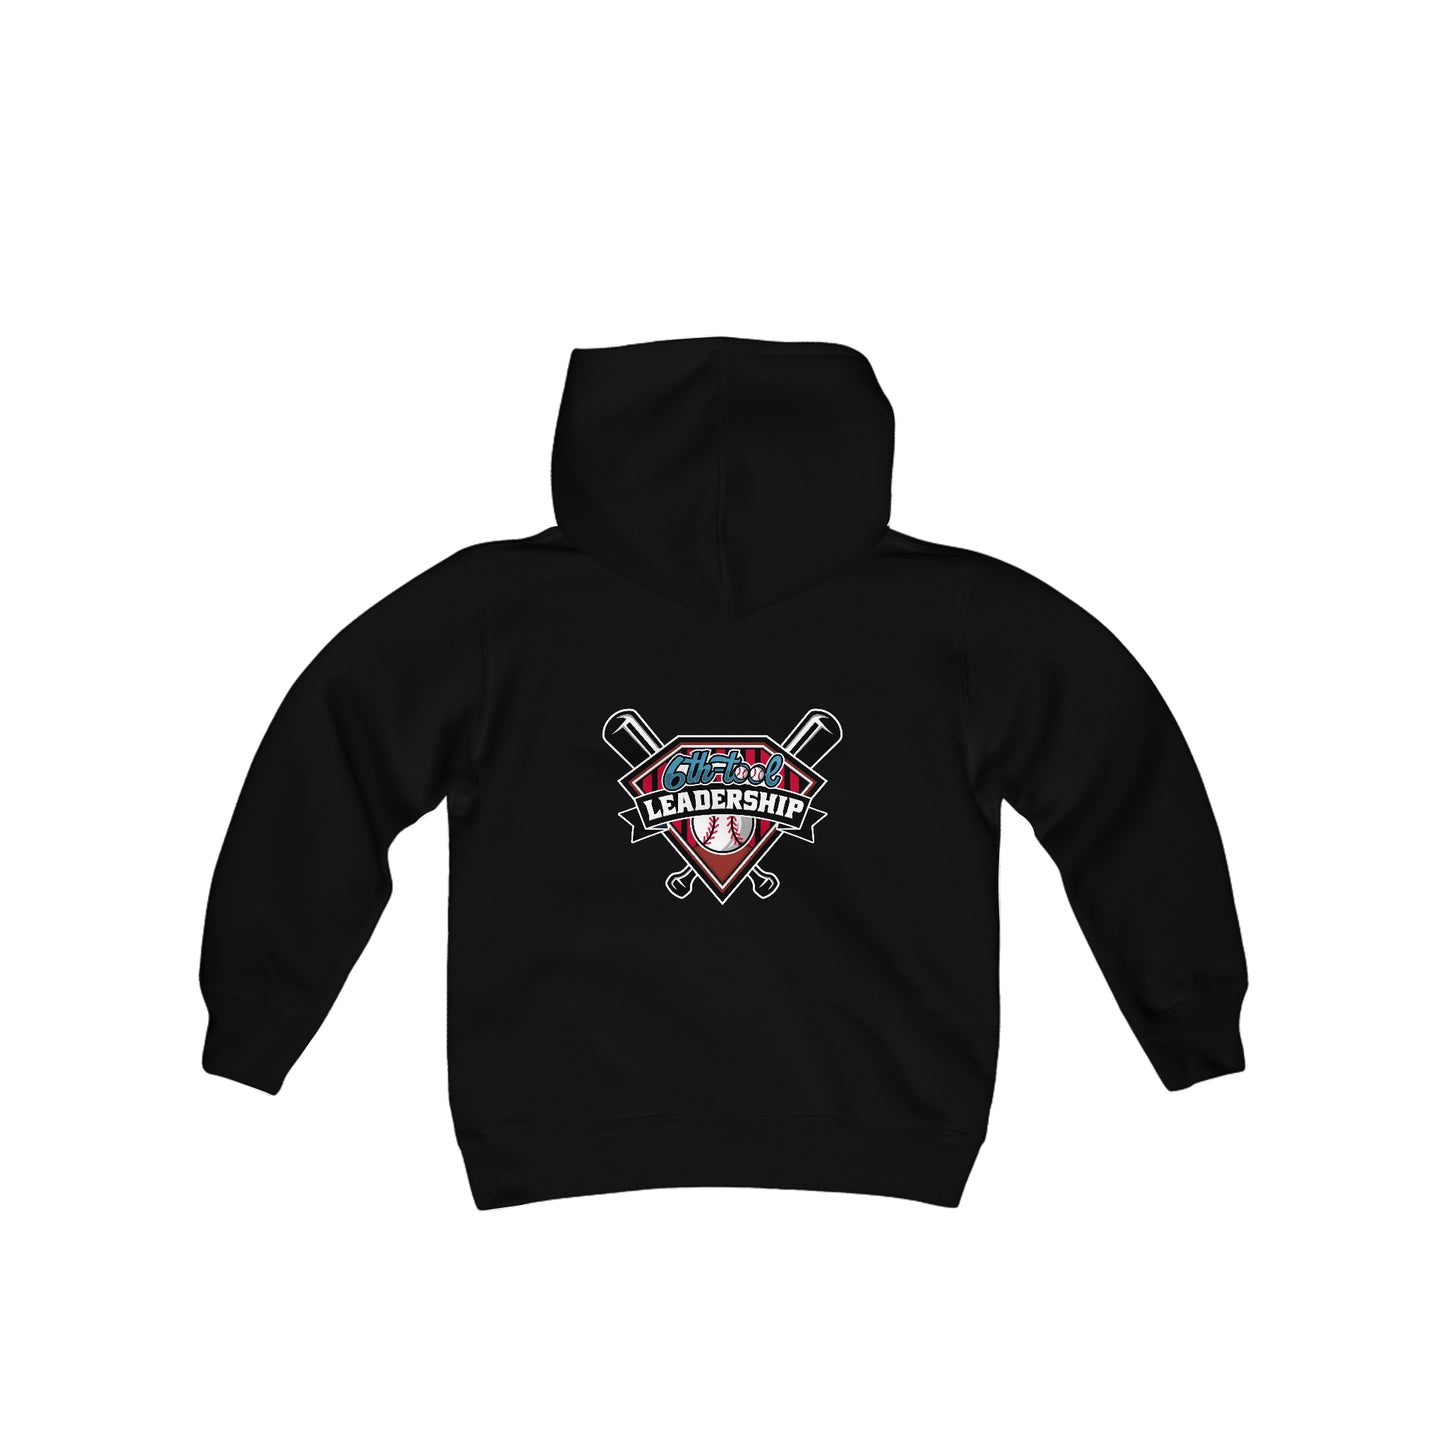 6th-Tool Solid Script Youth Hoodie